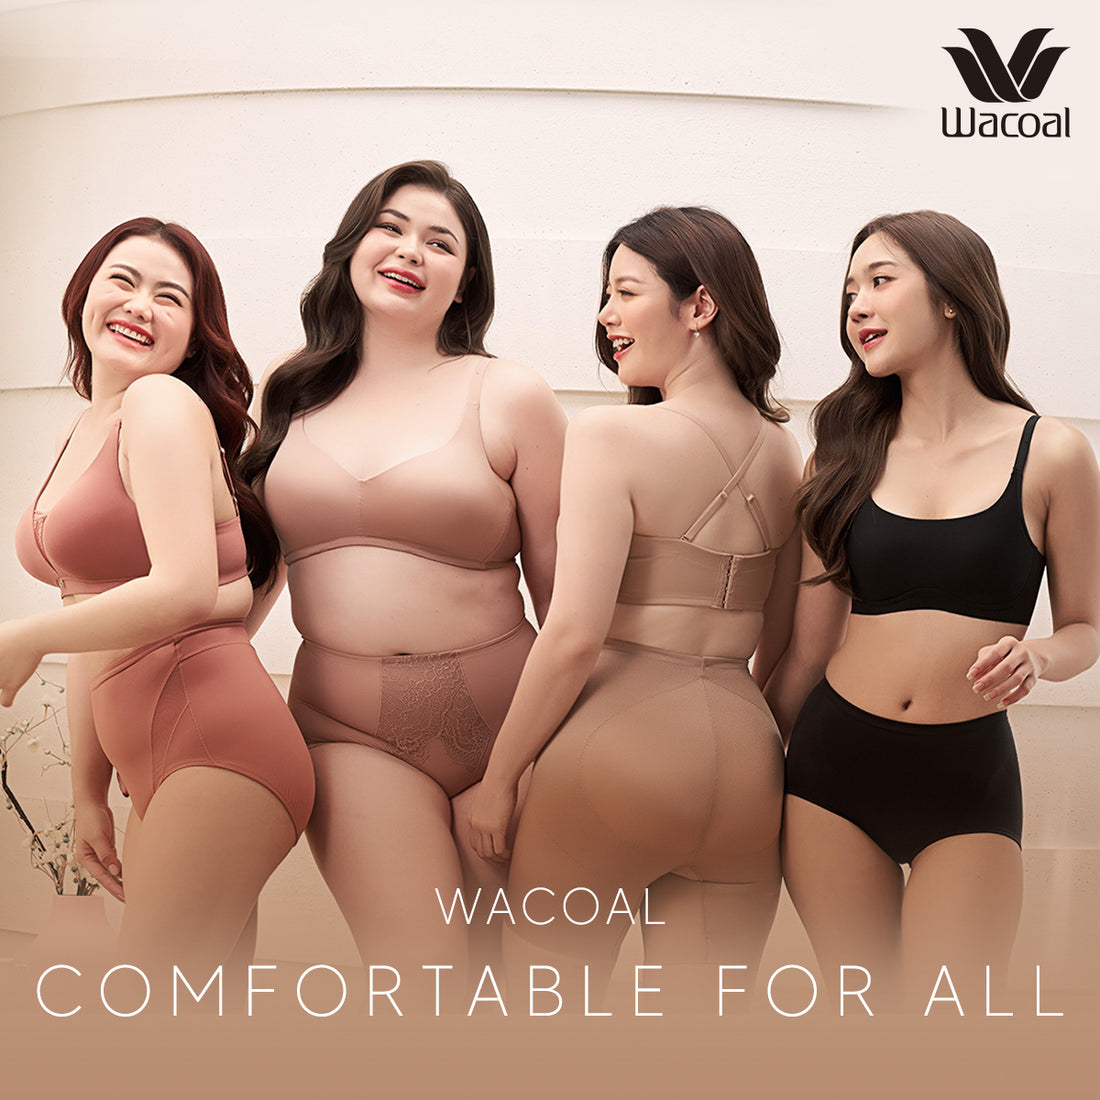 Wacoal Comfortable For All